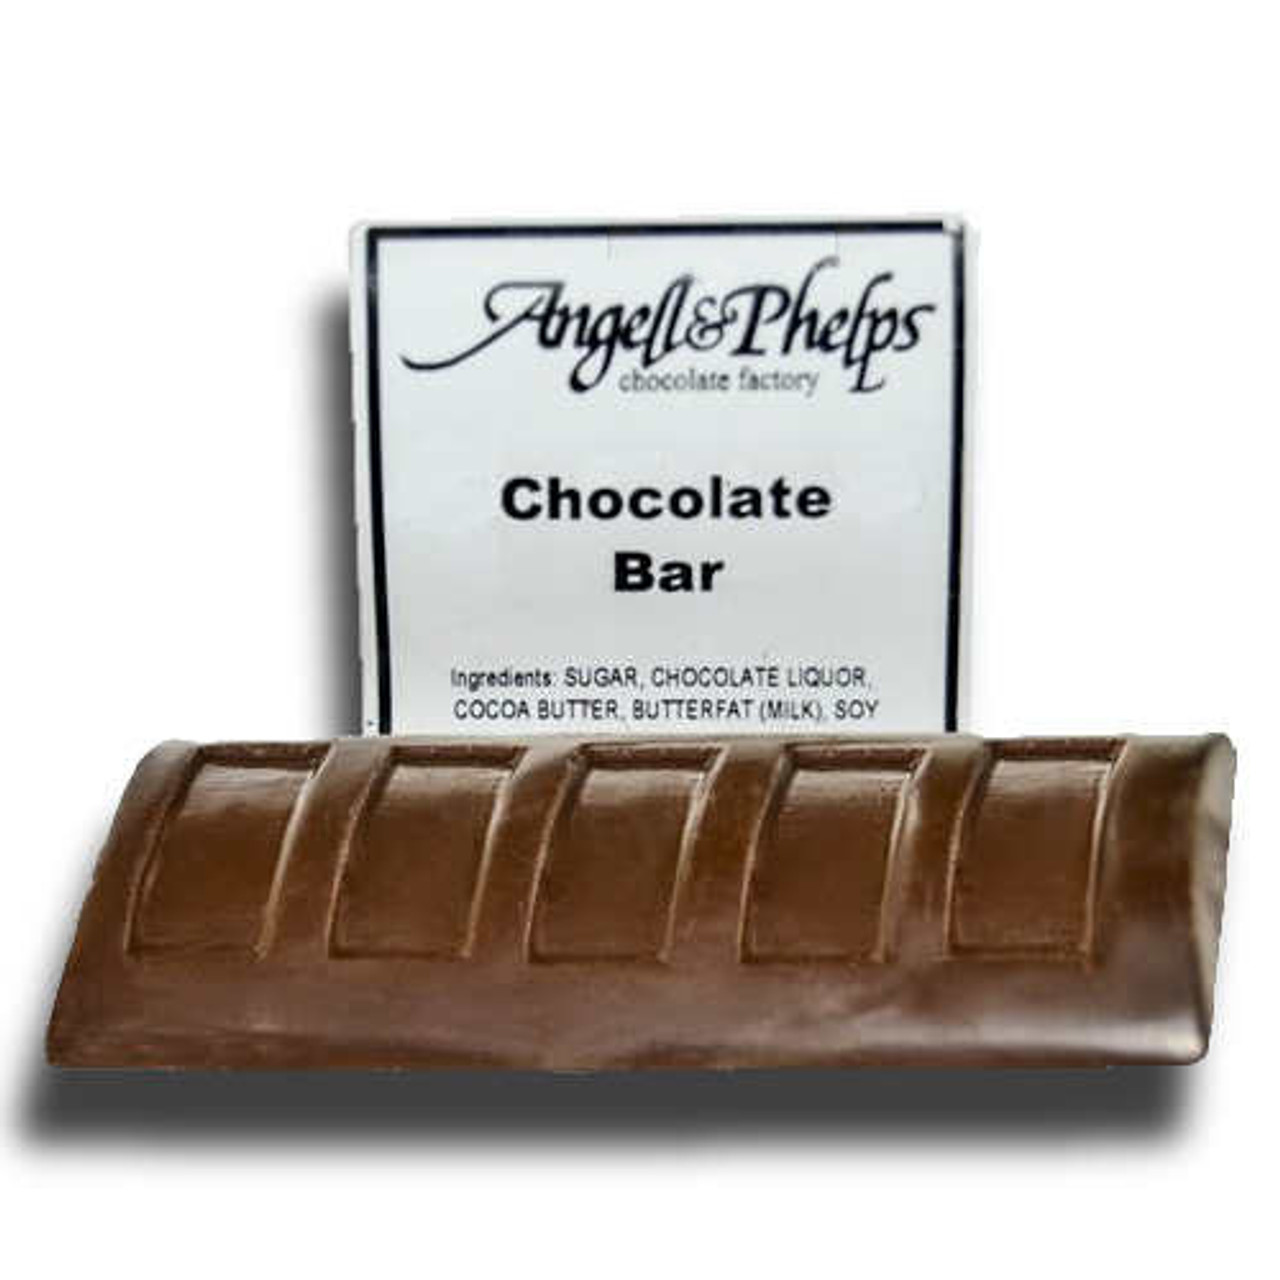 Chocolate Candy Bar - Angell and Phelps Chocolate Factory